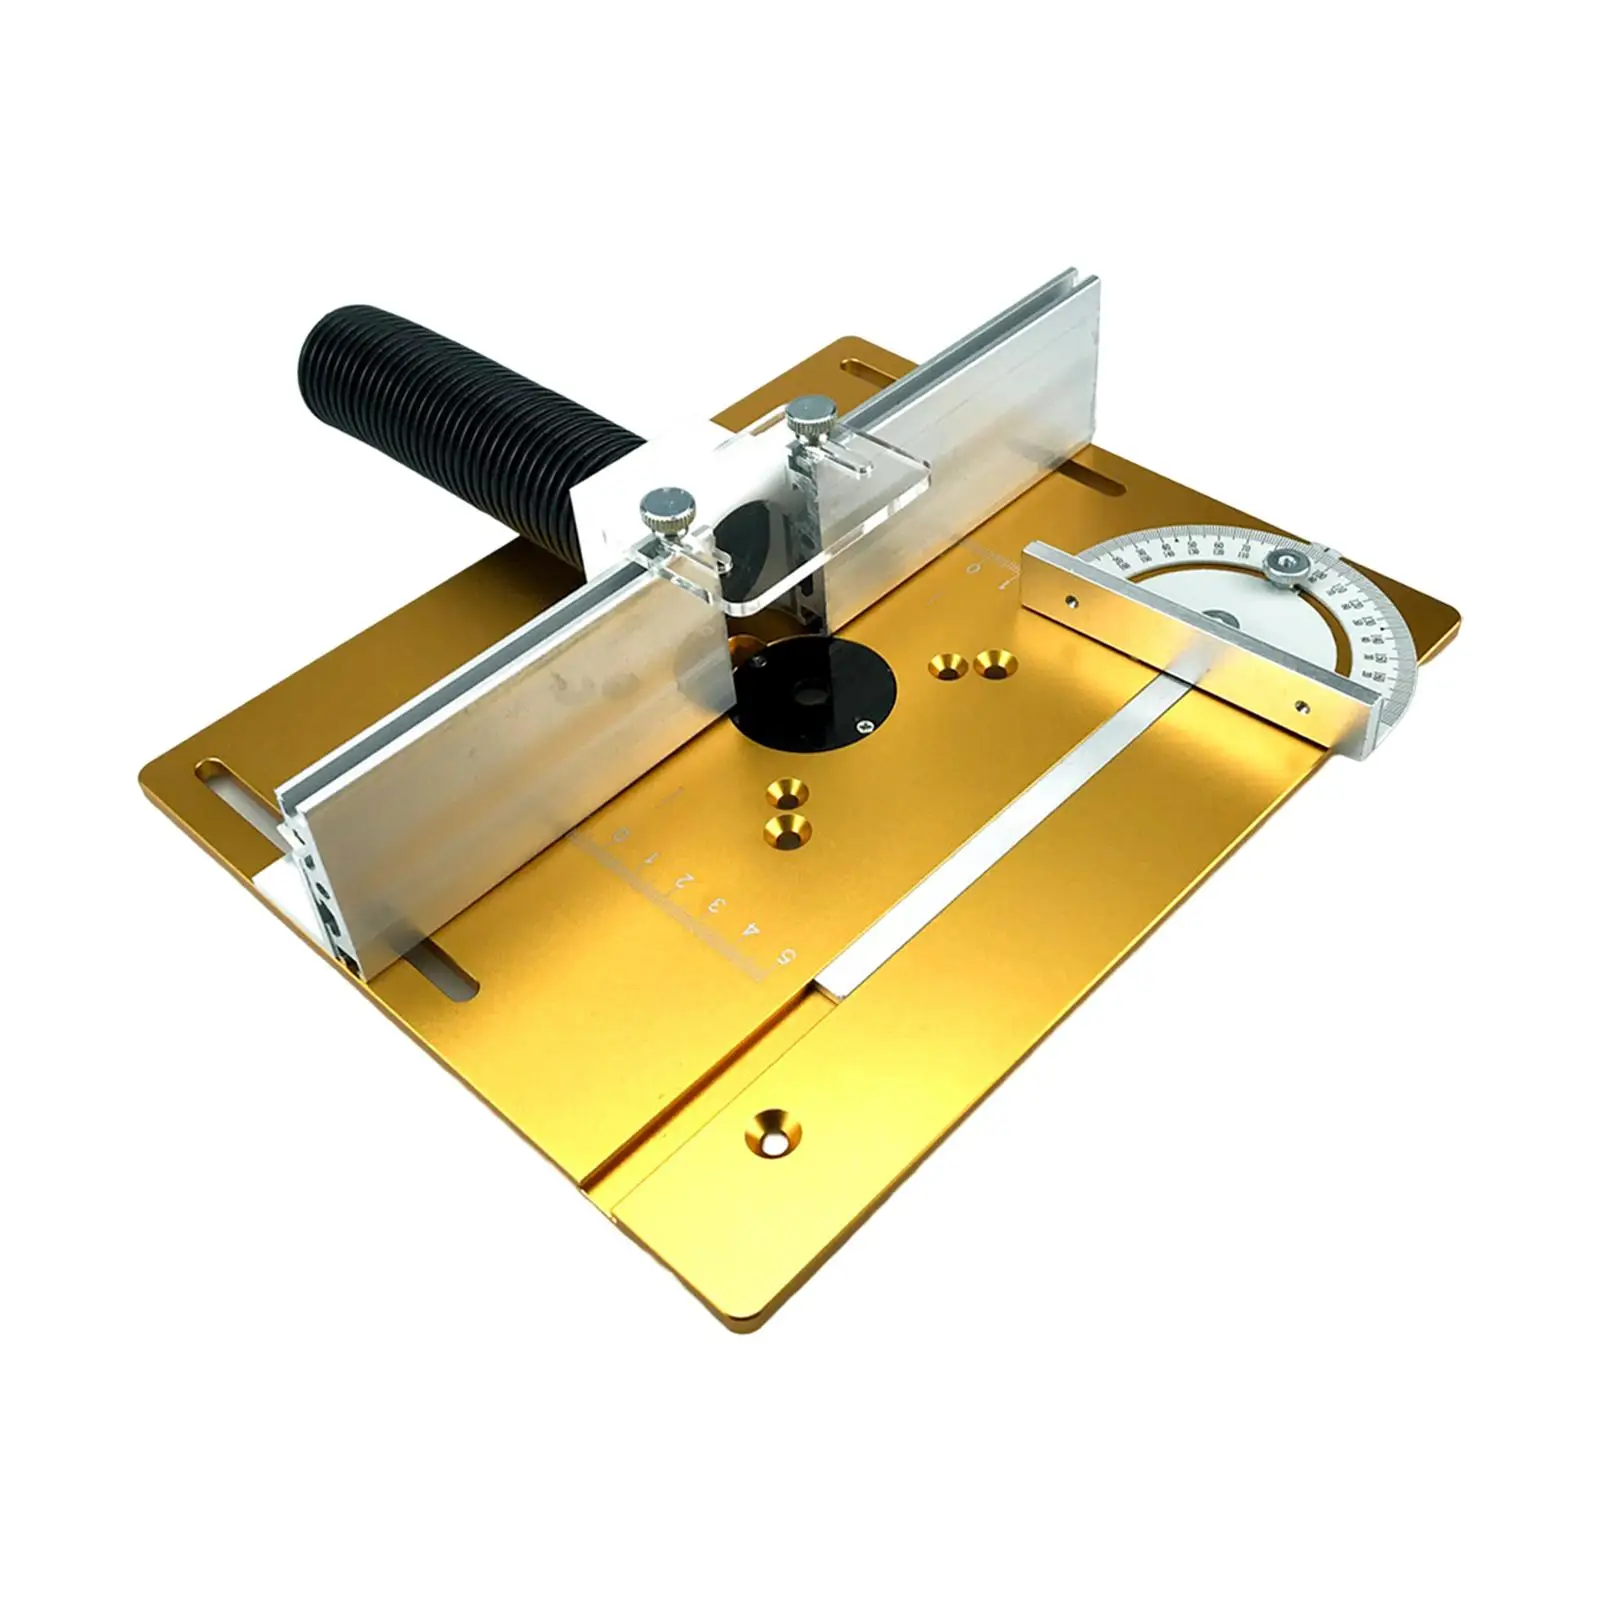 Router Table Insert Plate with Miter Gauge Aluminum Alloy Router Table Insert Plate Wood Milling Flip Board for Engraving